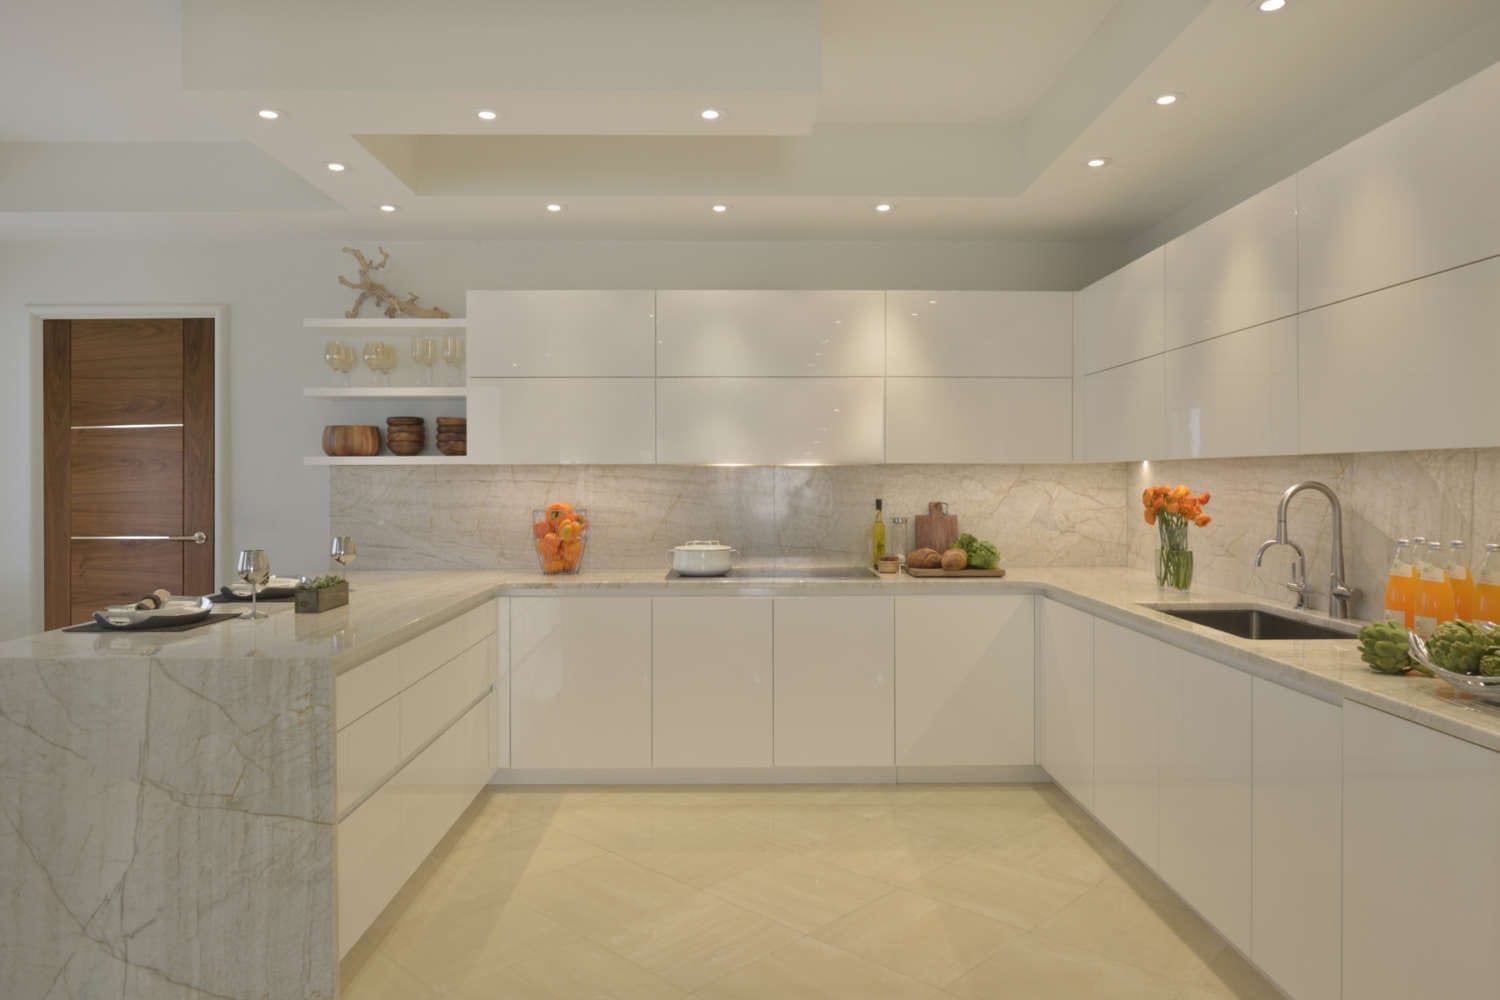 U-shaped kitchen features high gloss white, flat panel fully custom Artcraft cabinetry, light marble countertop and backsplash with veining, light porcelain tile flooring, open shelving and soft lighting.